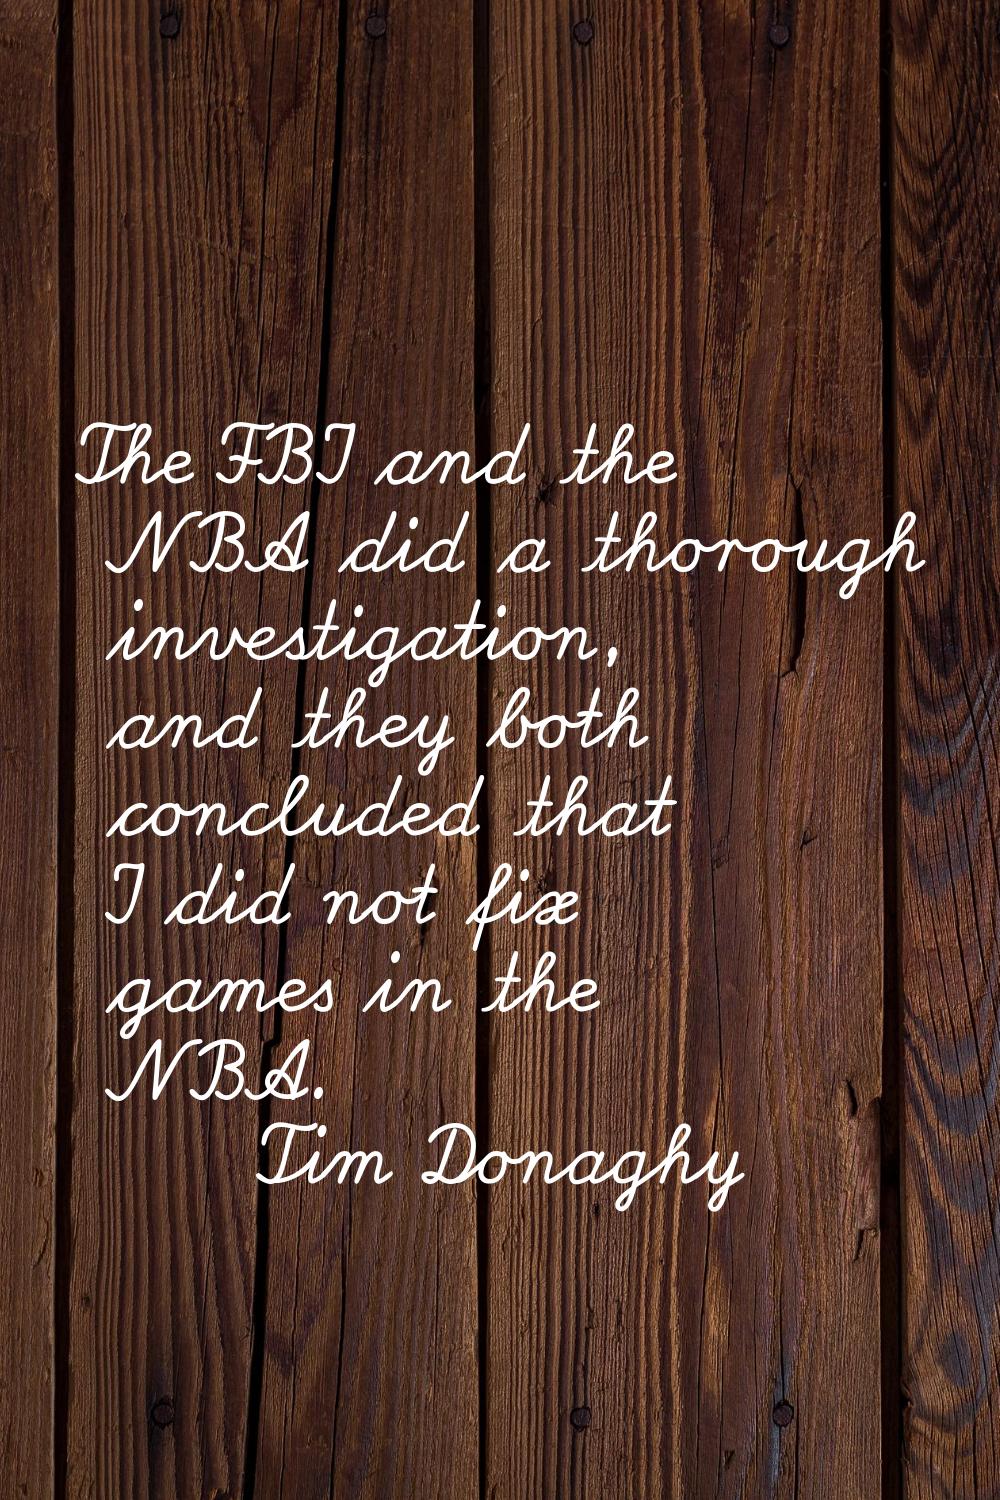 The FBI and the NBA did a thorough investigation, and they both concluded that I did not fix games 